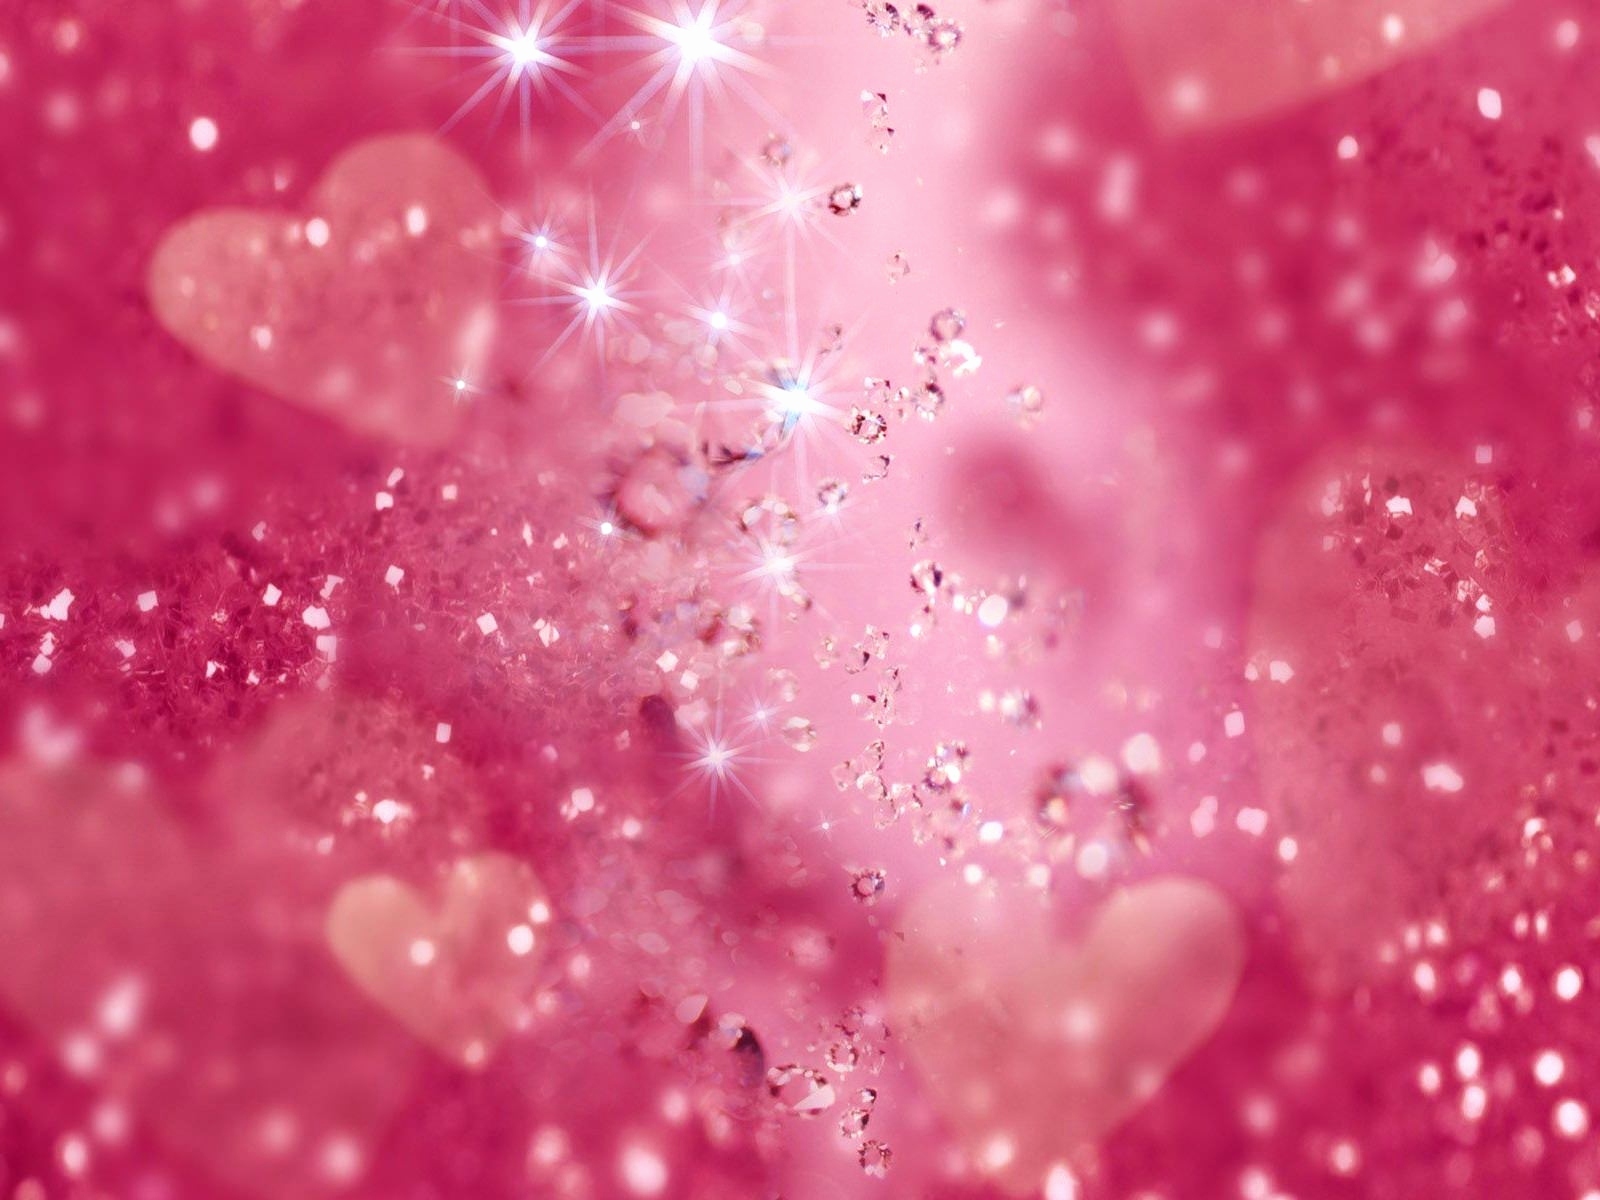 pink sparkly wallpaper Best of Pink Glitter Backgrounds Wallpapers 2019 |  Hira Sweets